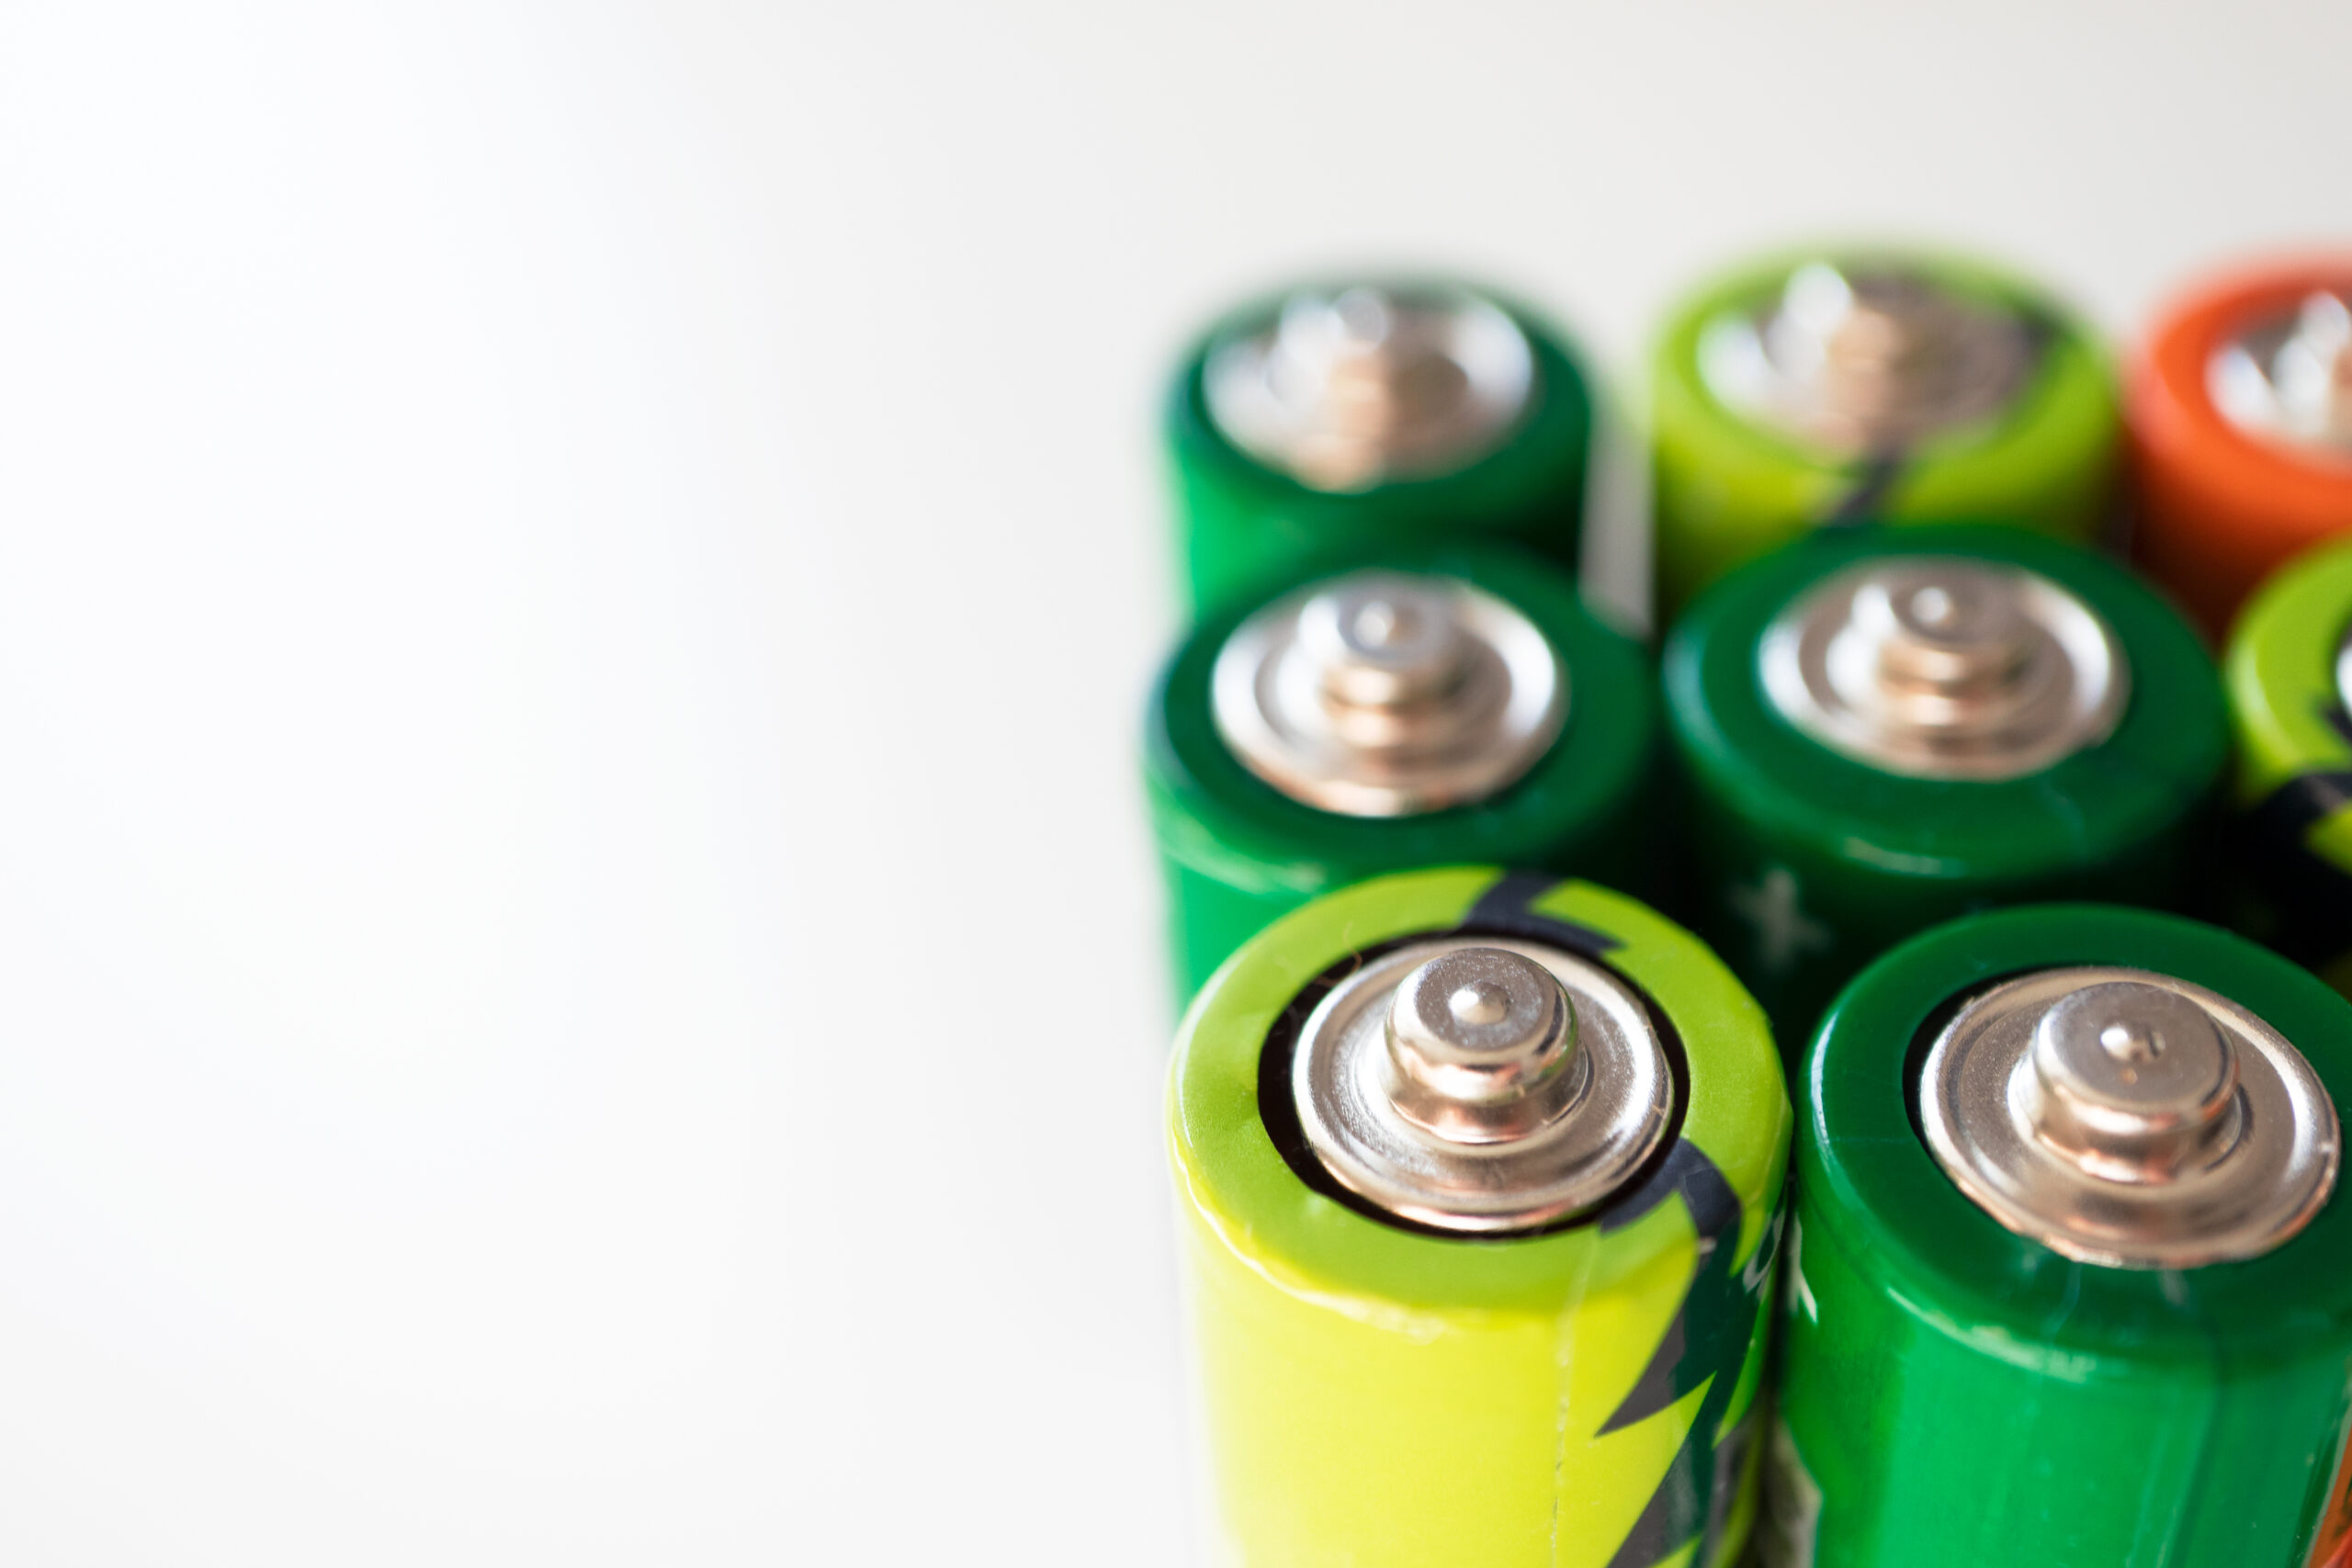 Various alkaline batteries on white background with selective focus. Concept waste sorting and environmental pollution